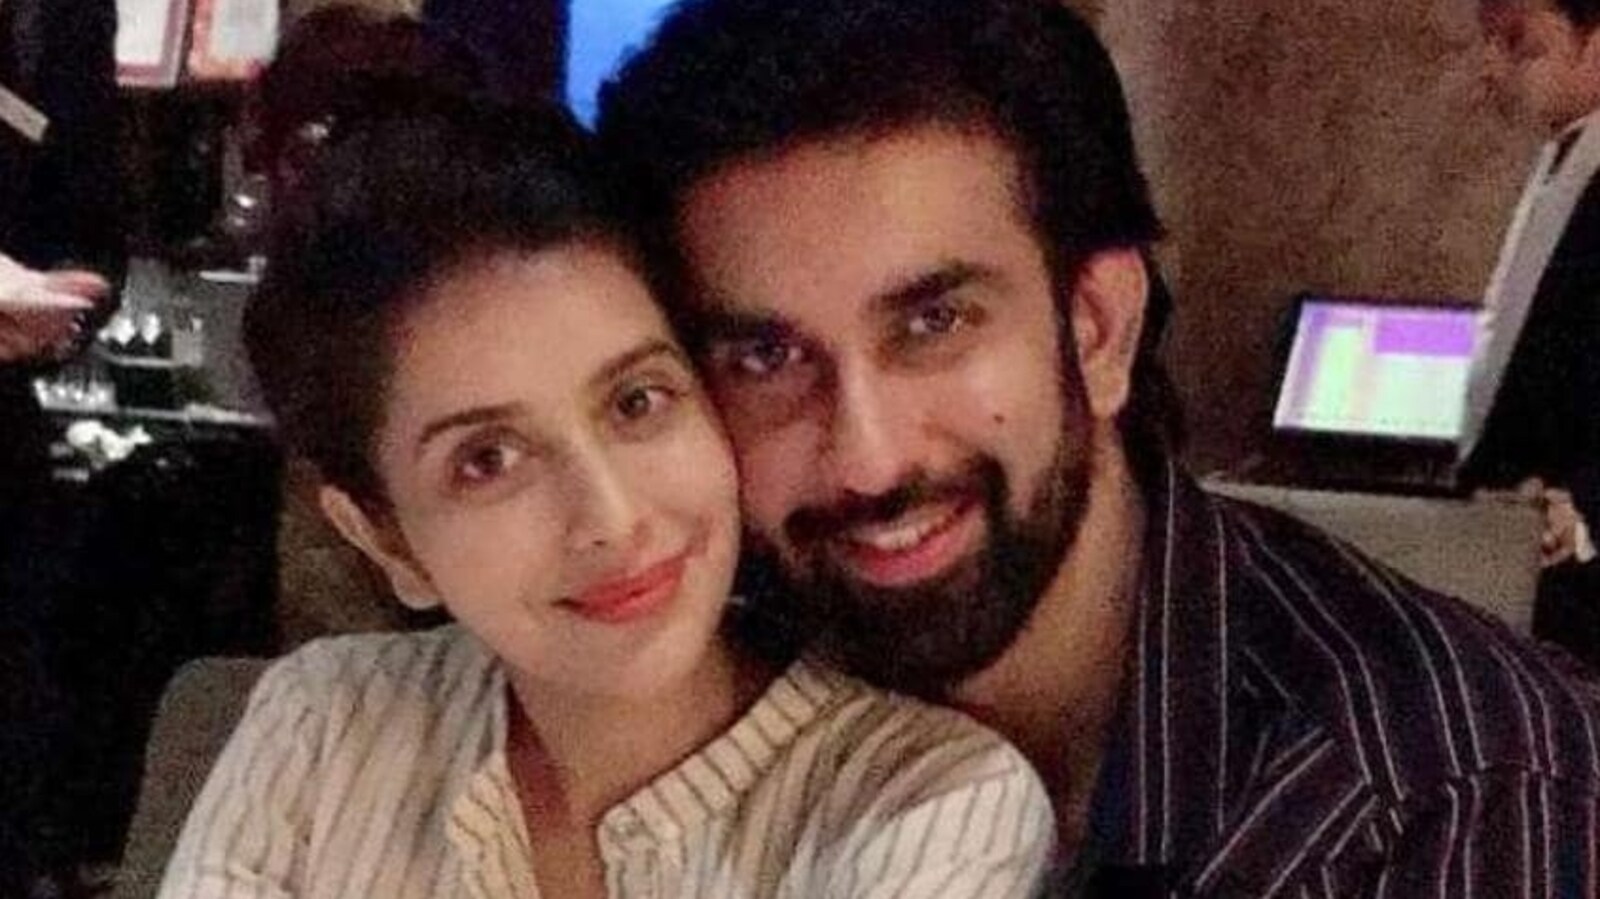 Rajeev Sen claims Charu Asopa ‘loves’ him, says ‘doors are open for you’: She’s crying in front of the camera because…